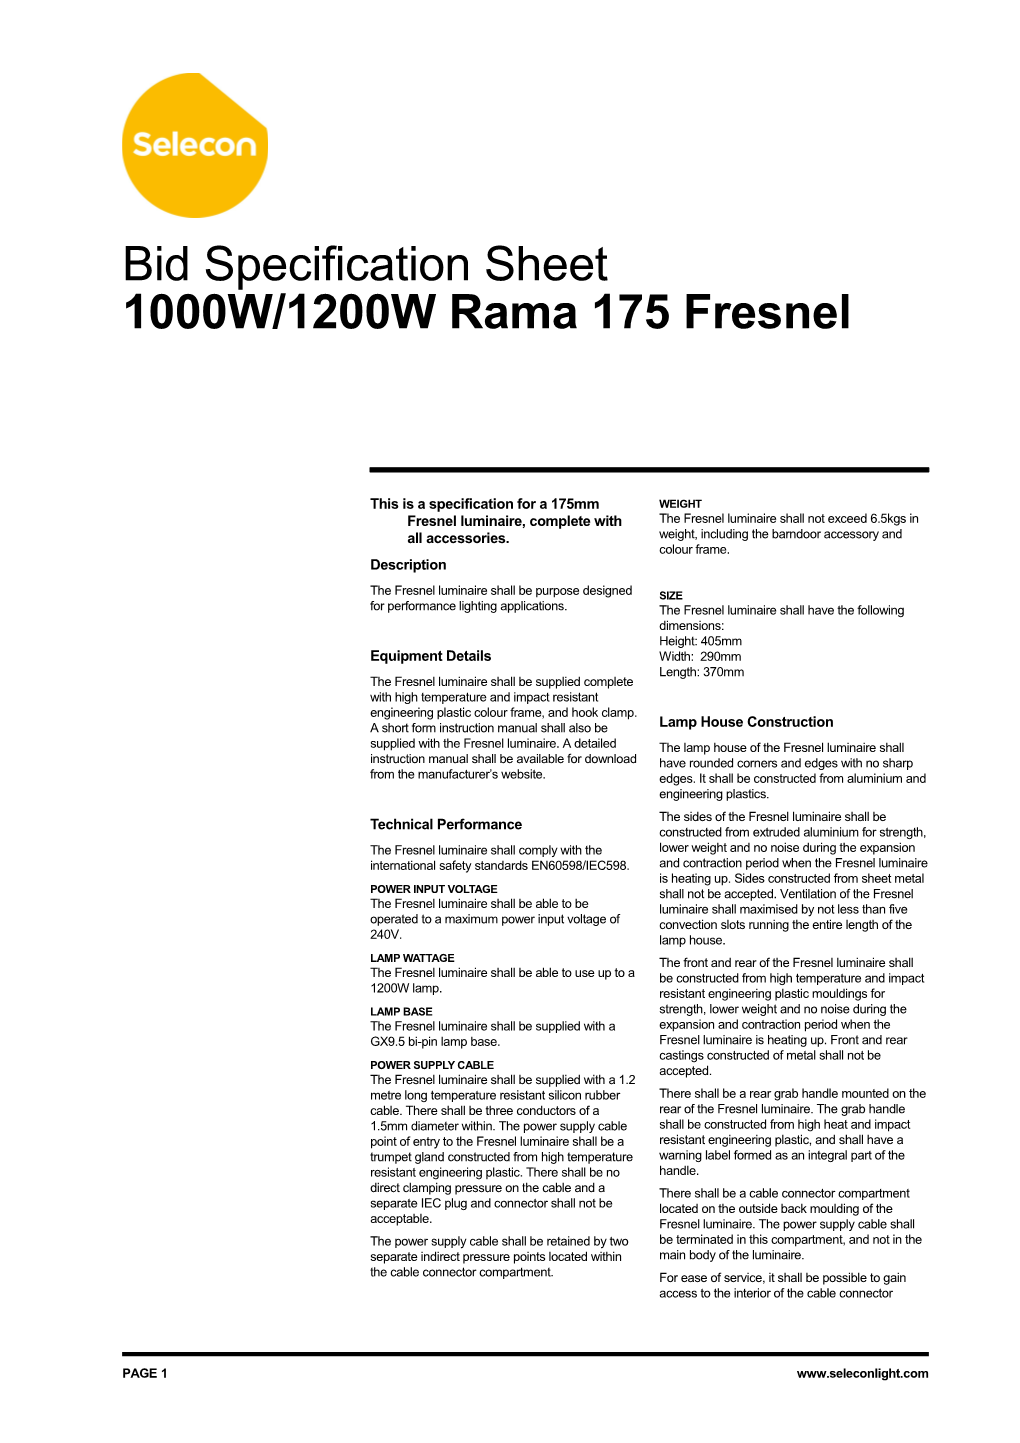 This Is a Specification for a 175Mm Fresnel Luminaire, Complete with All Accessories